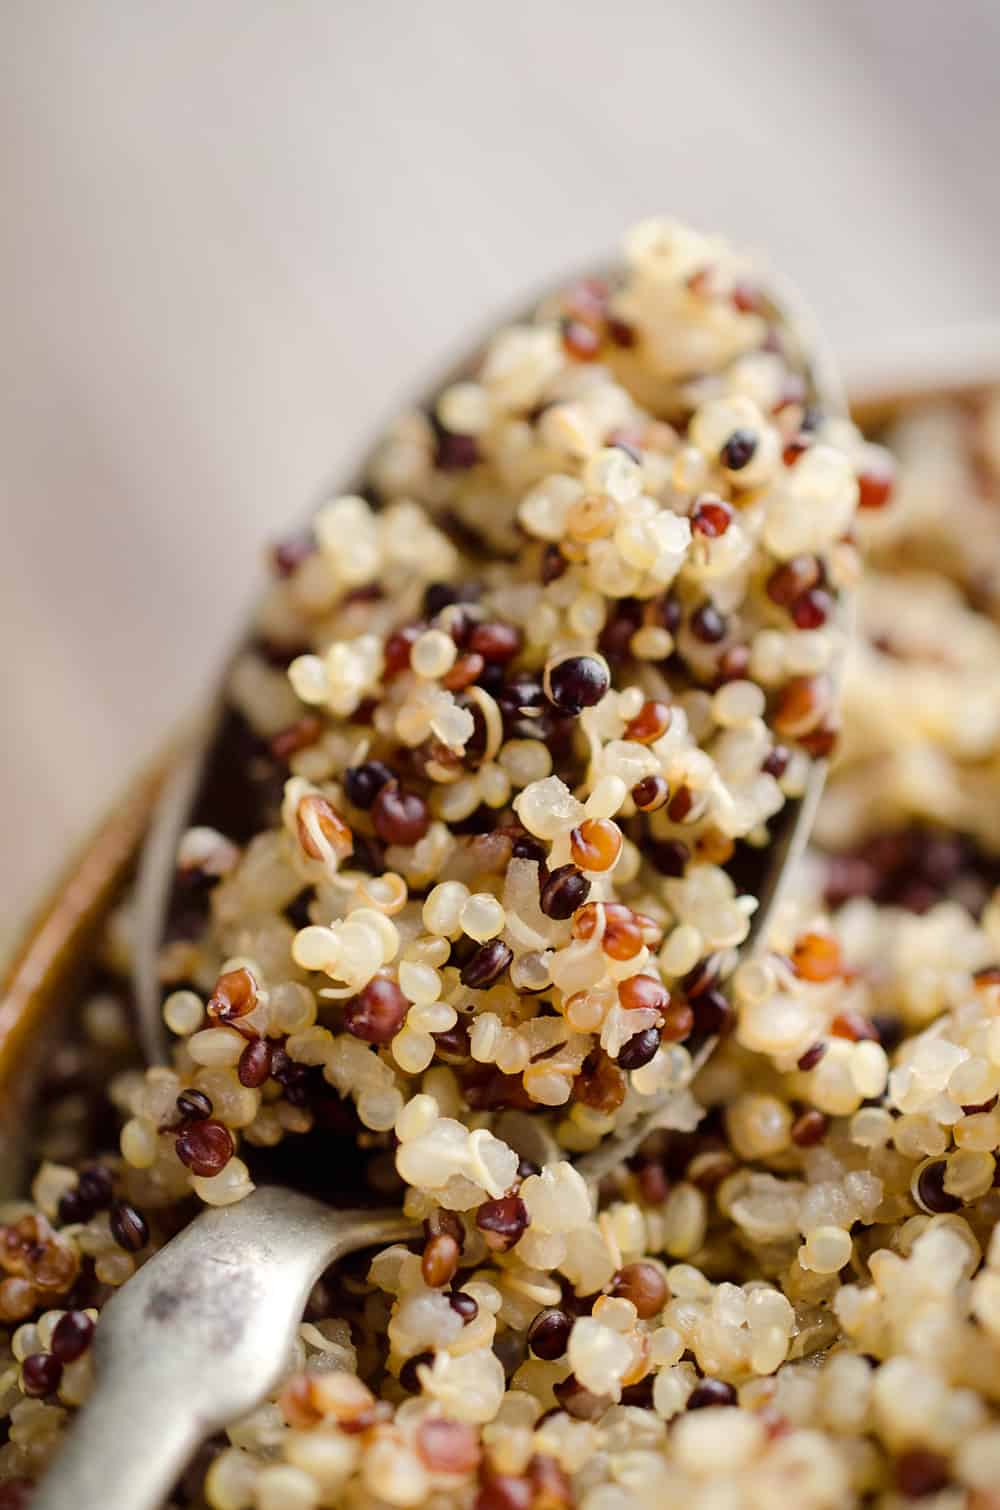 This is the Easiest Fluffy Quinoa Recipe you will make with the help of your Pressure Cooker. Set it and forget it for the best quinoa made in your Instant Pot in just 20 minutes.